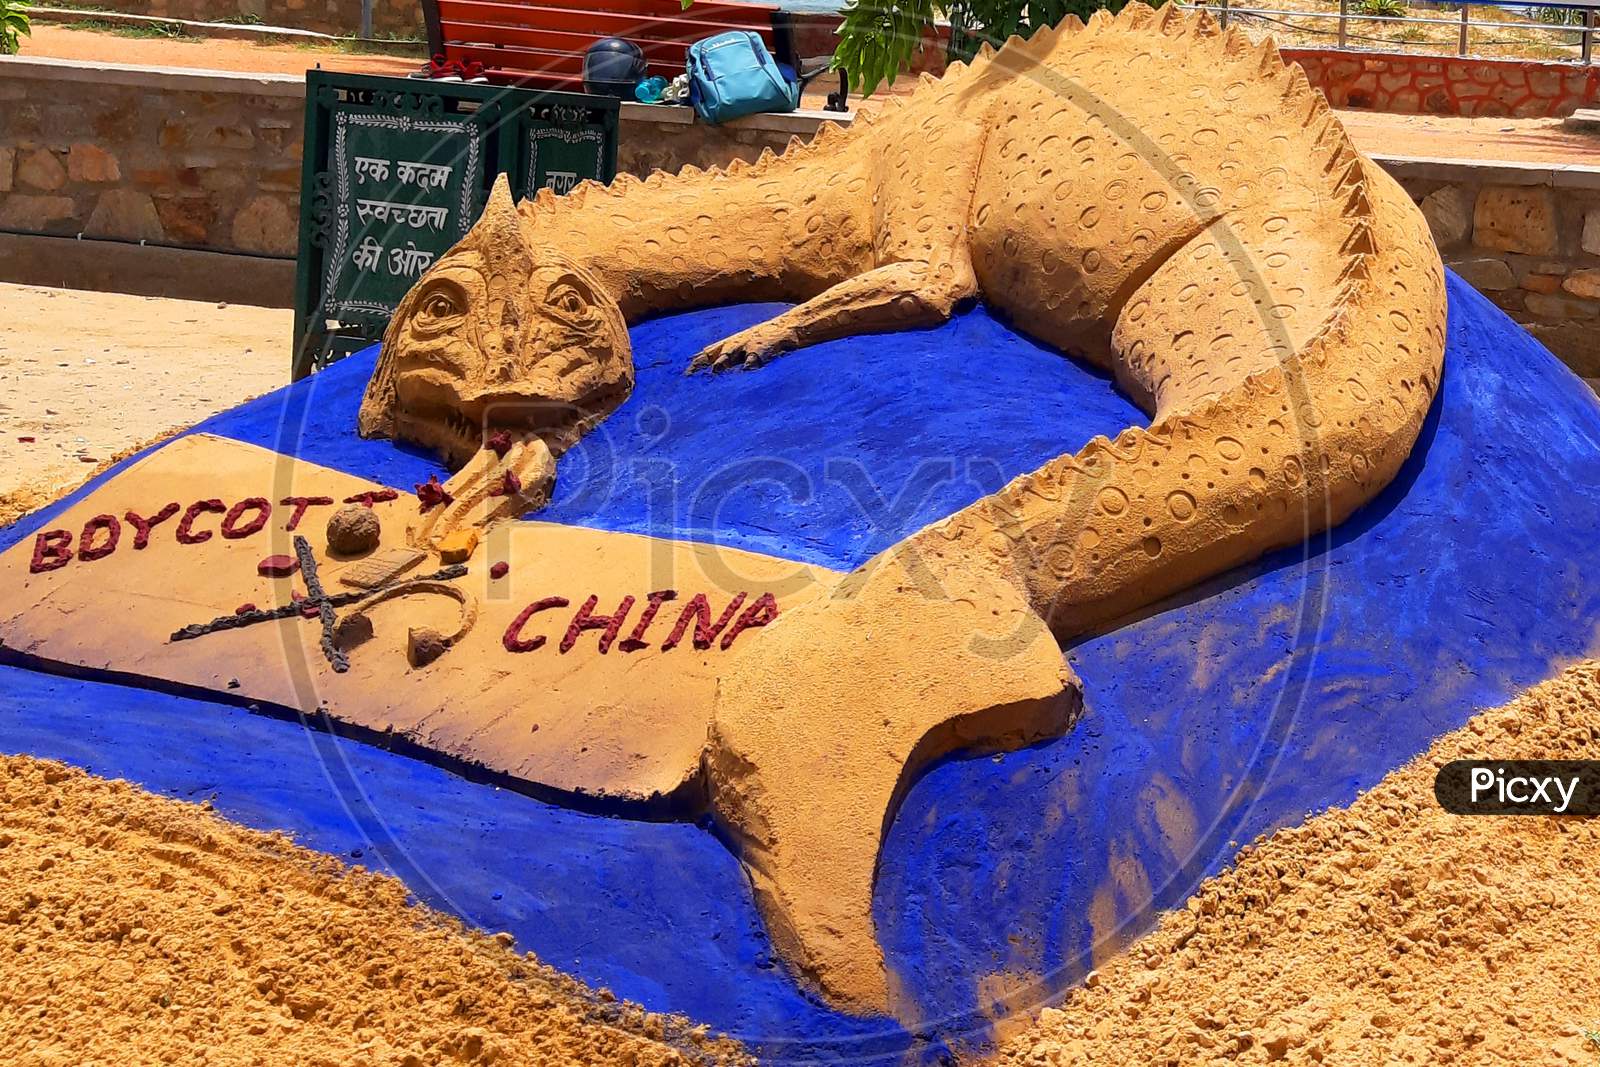 Sand artist Ajay Rawat creates a sculpture to support the "Boycott China Product" movement in Ajmer, India on July 03, 2020